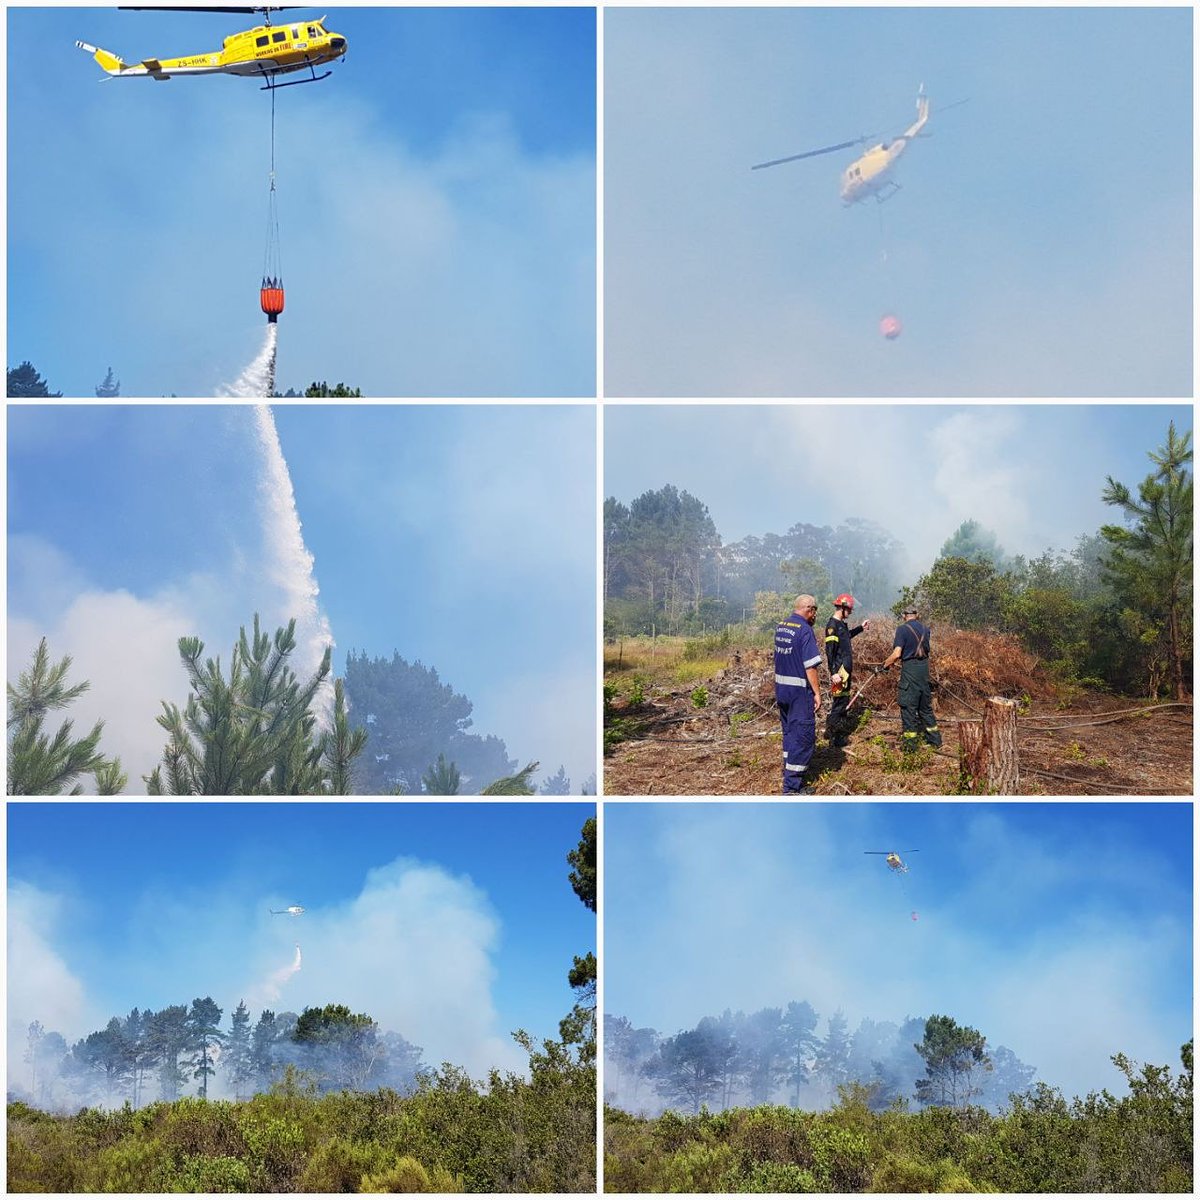 Today our crews assisted with our 5th fire in 6 days. This time at Langvlei Dunes near Wildernis. Great teamwork by all services ensured quick containment with no loss of property #wildfire